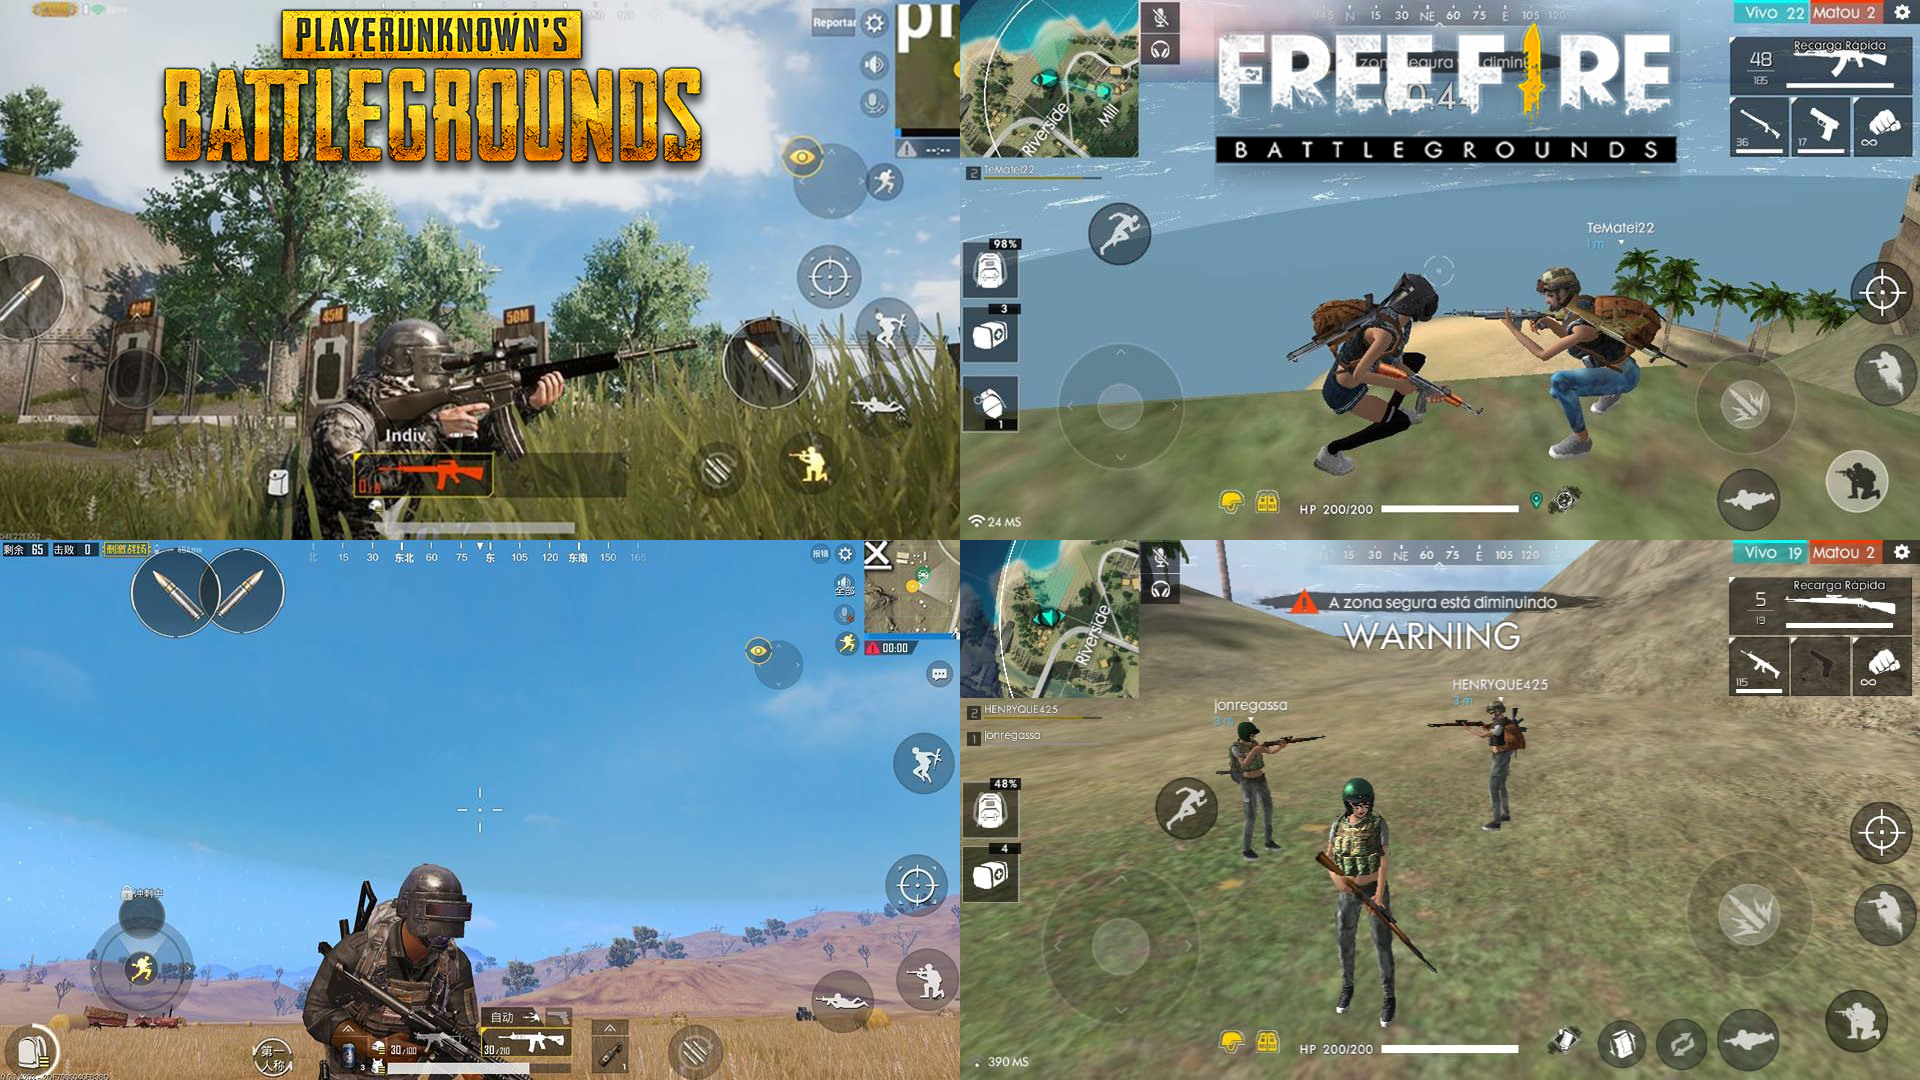 Free fire mobile | Download Free Fire Battlegrounds for PC ...